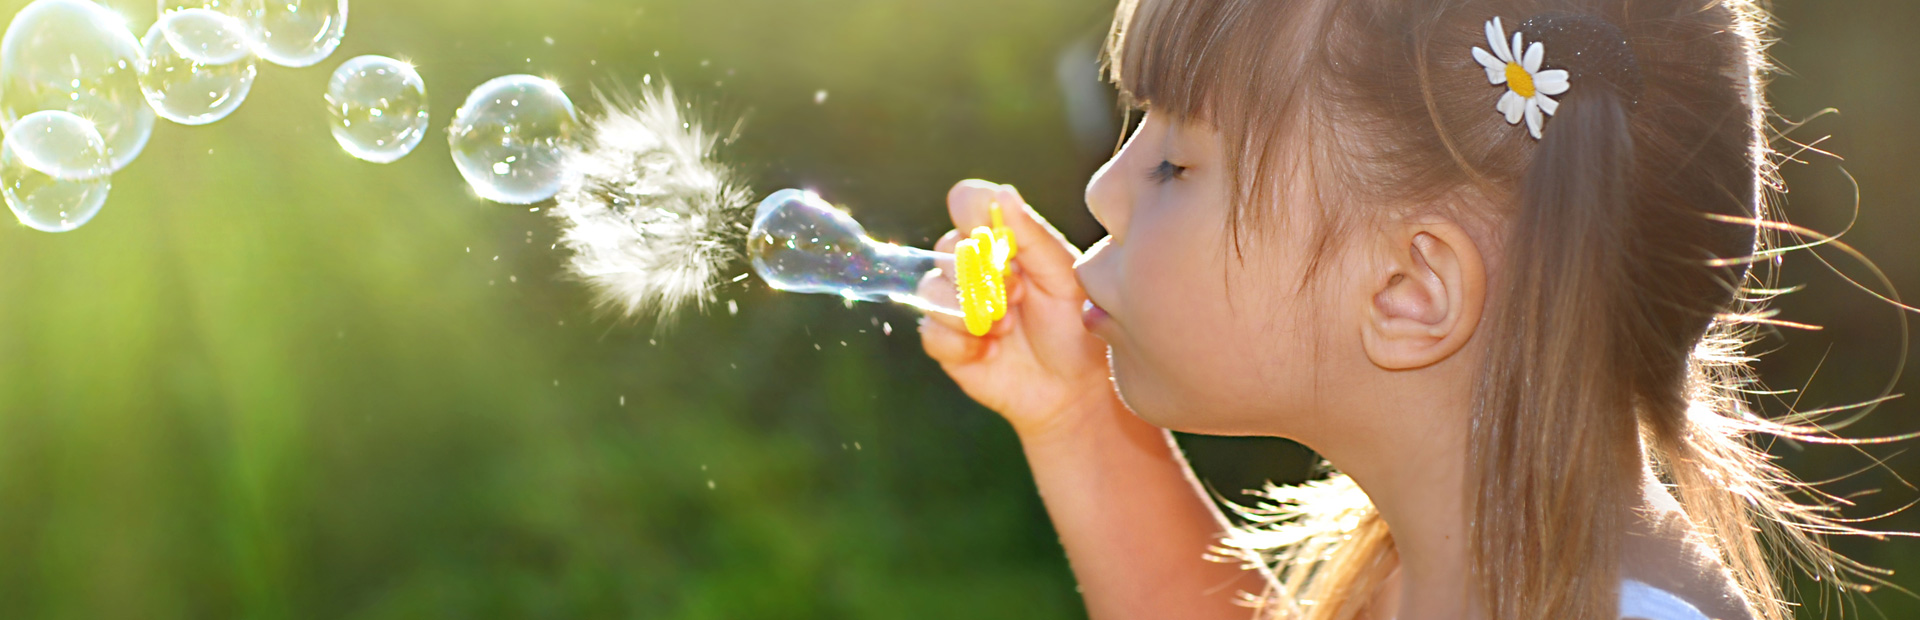 Child blowing bubbles and having fun